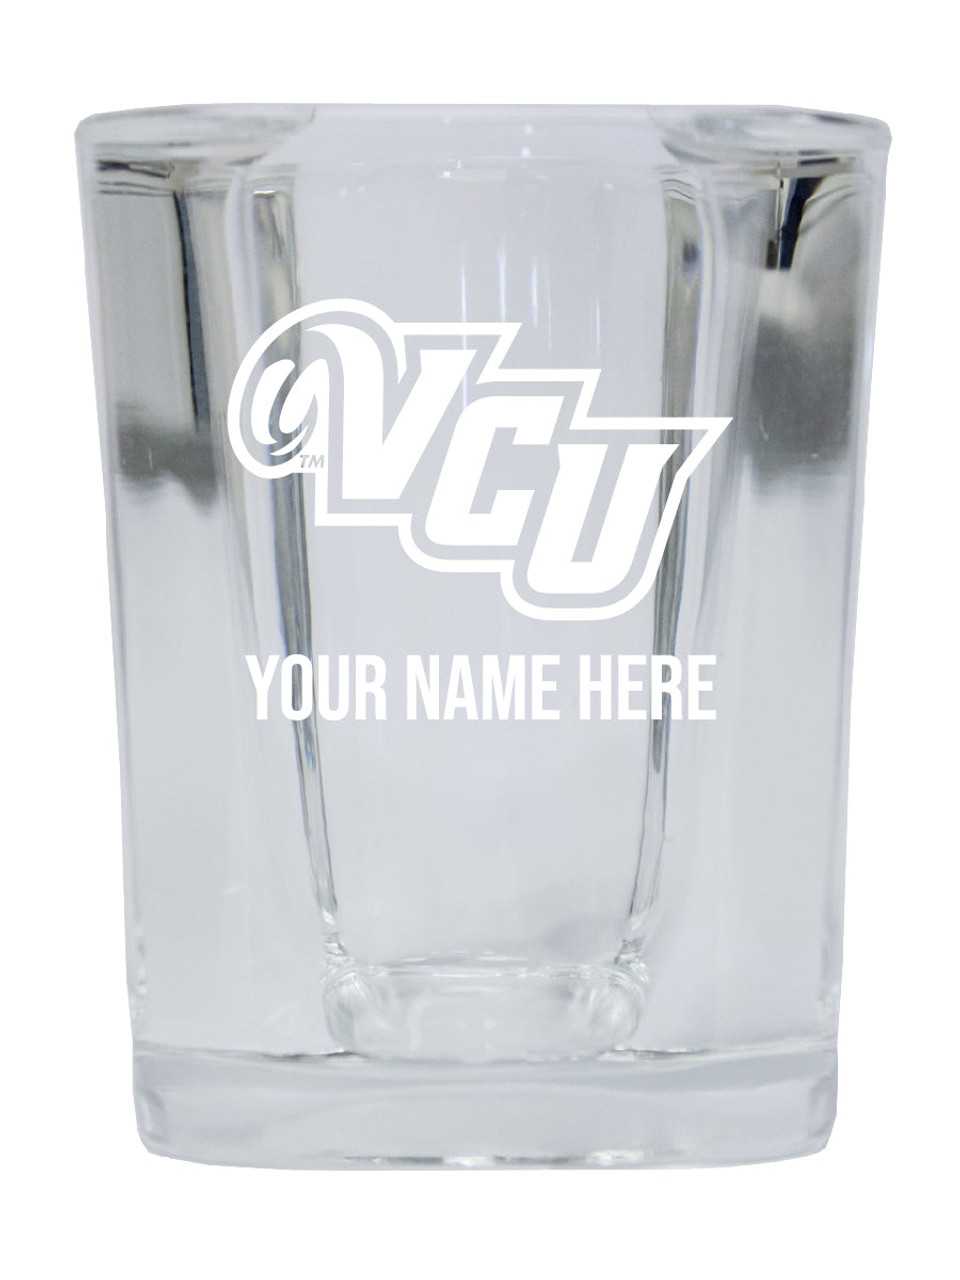 Personalized Virginia Commonwealth Etched Square Shot Glass 2 oz With Custom Name